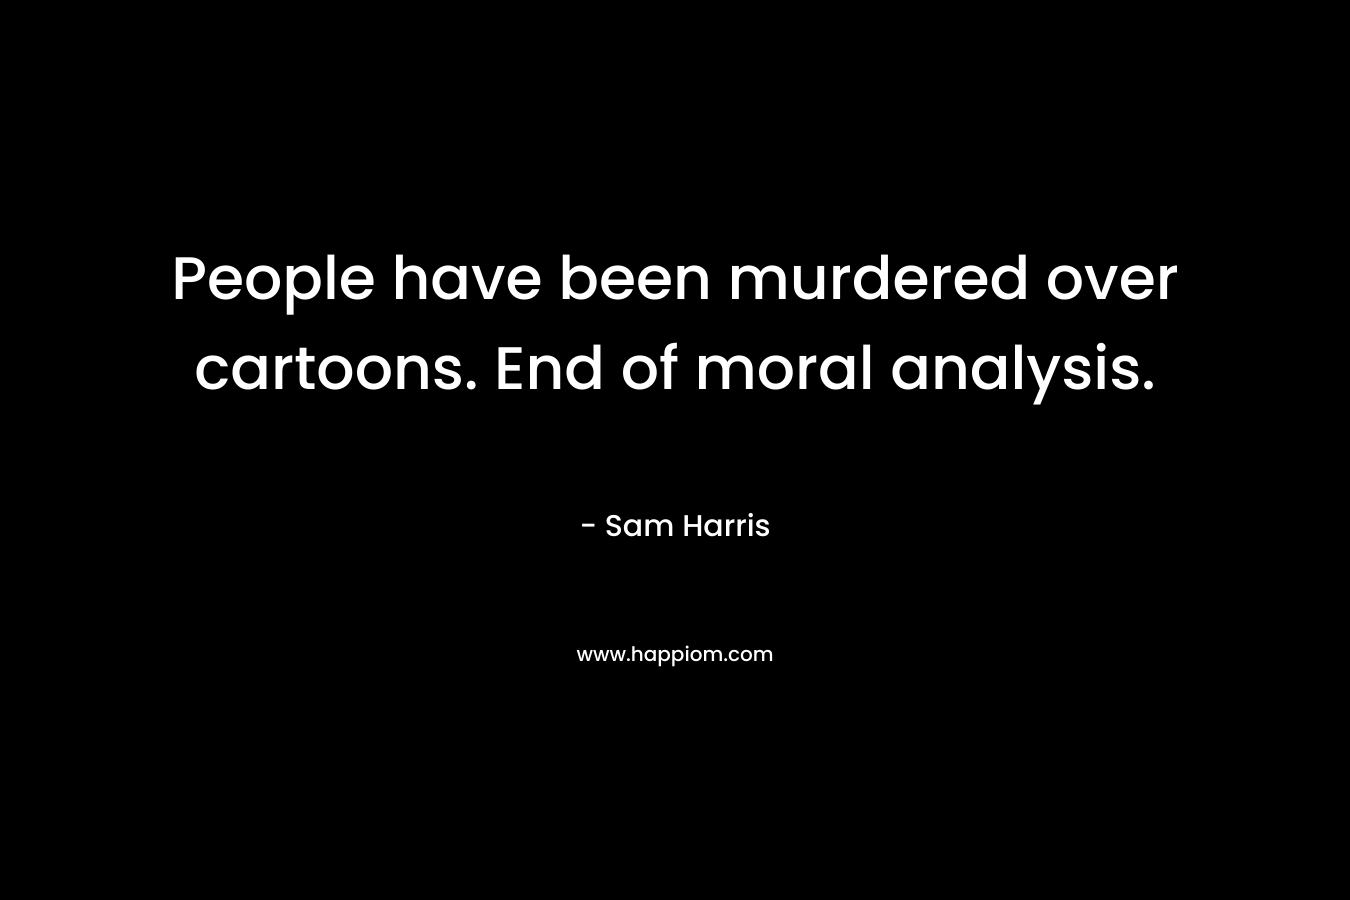 People have been murdered over cartoons. End of moral analysis. – Sam Harris